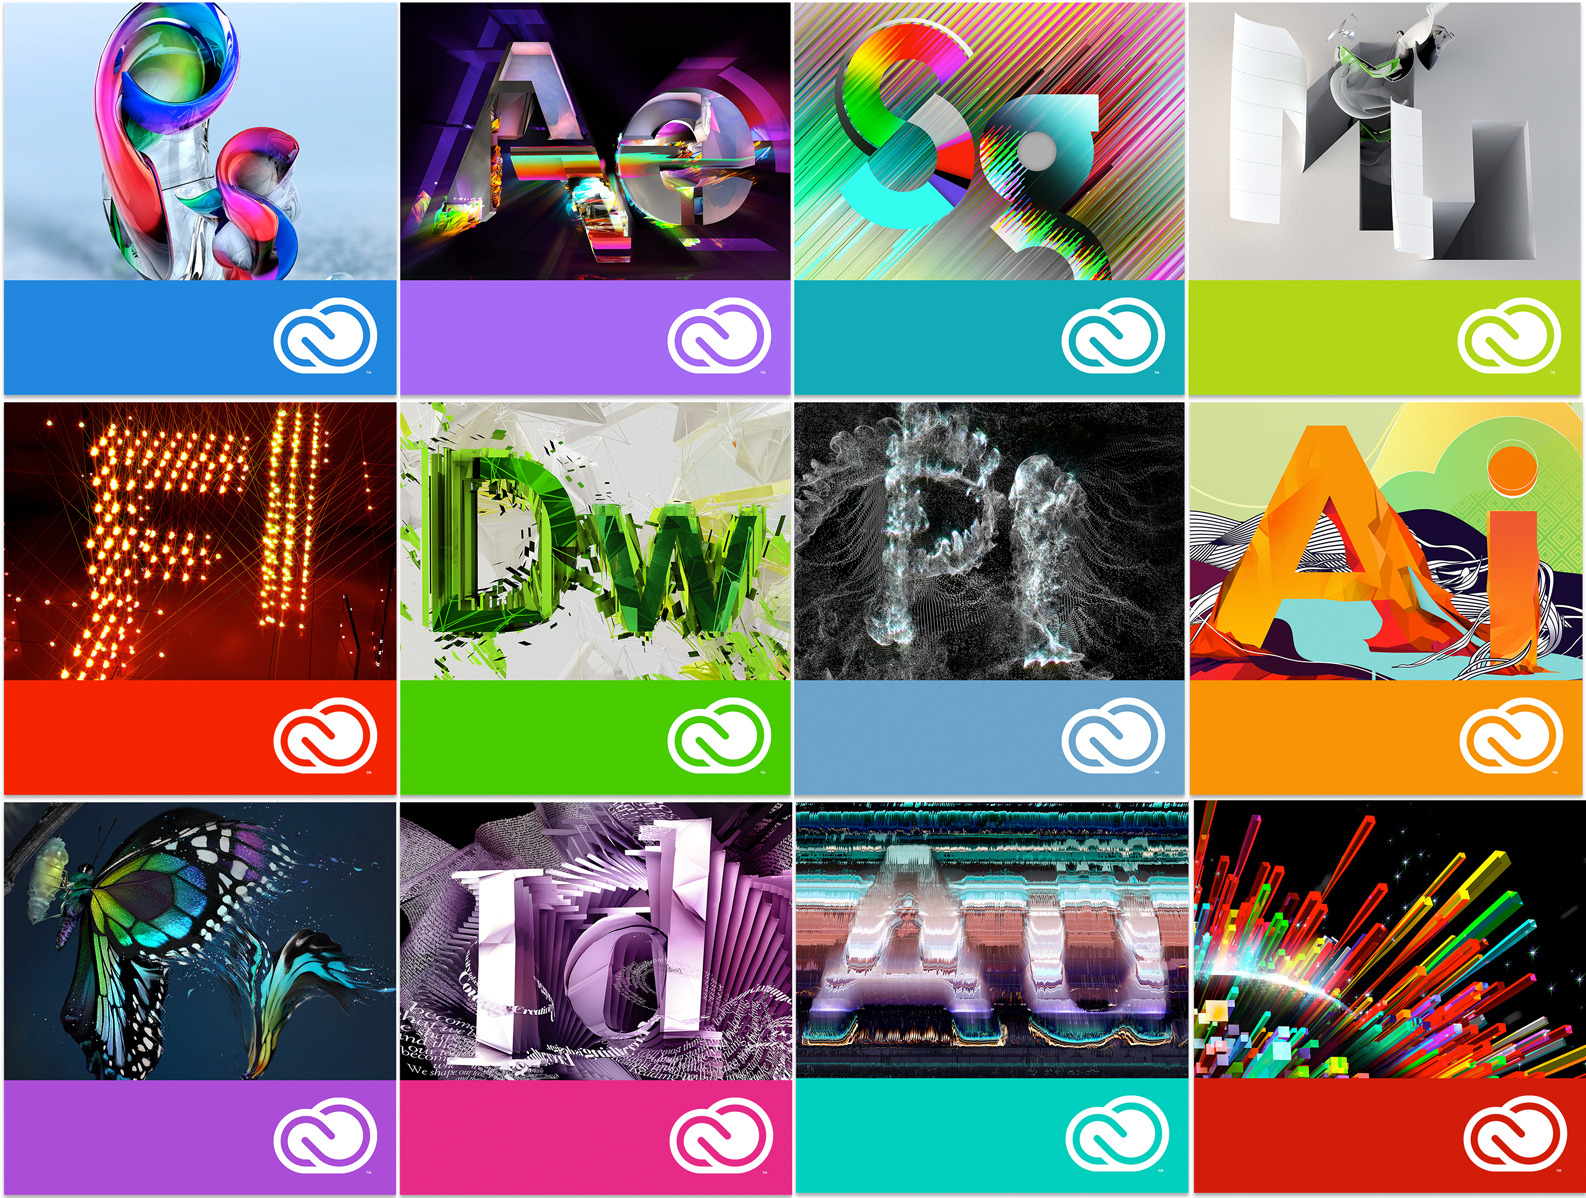 Adobe Cs5 Master Collection Free Download With Crack For Mac